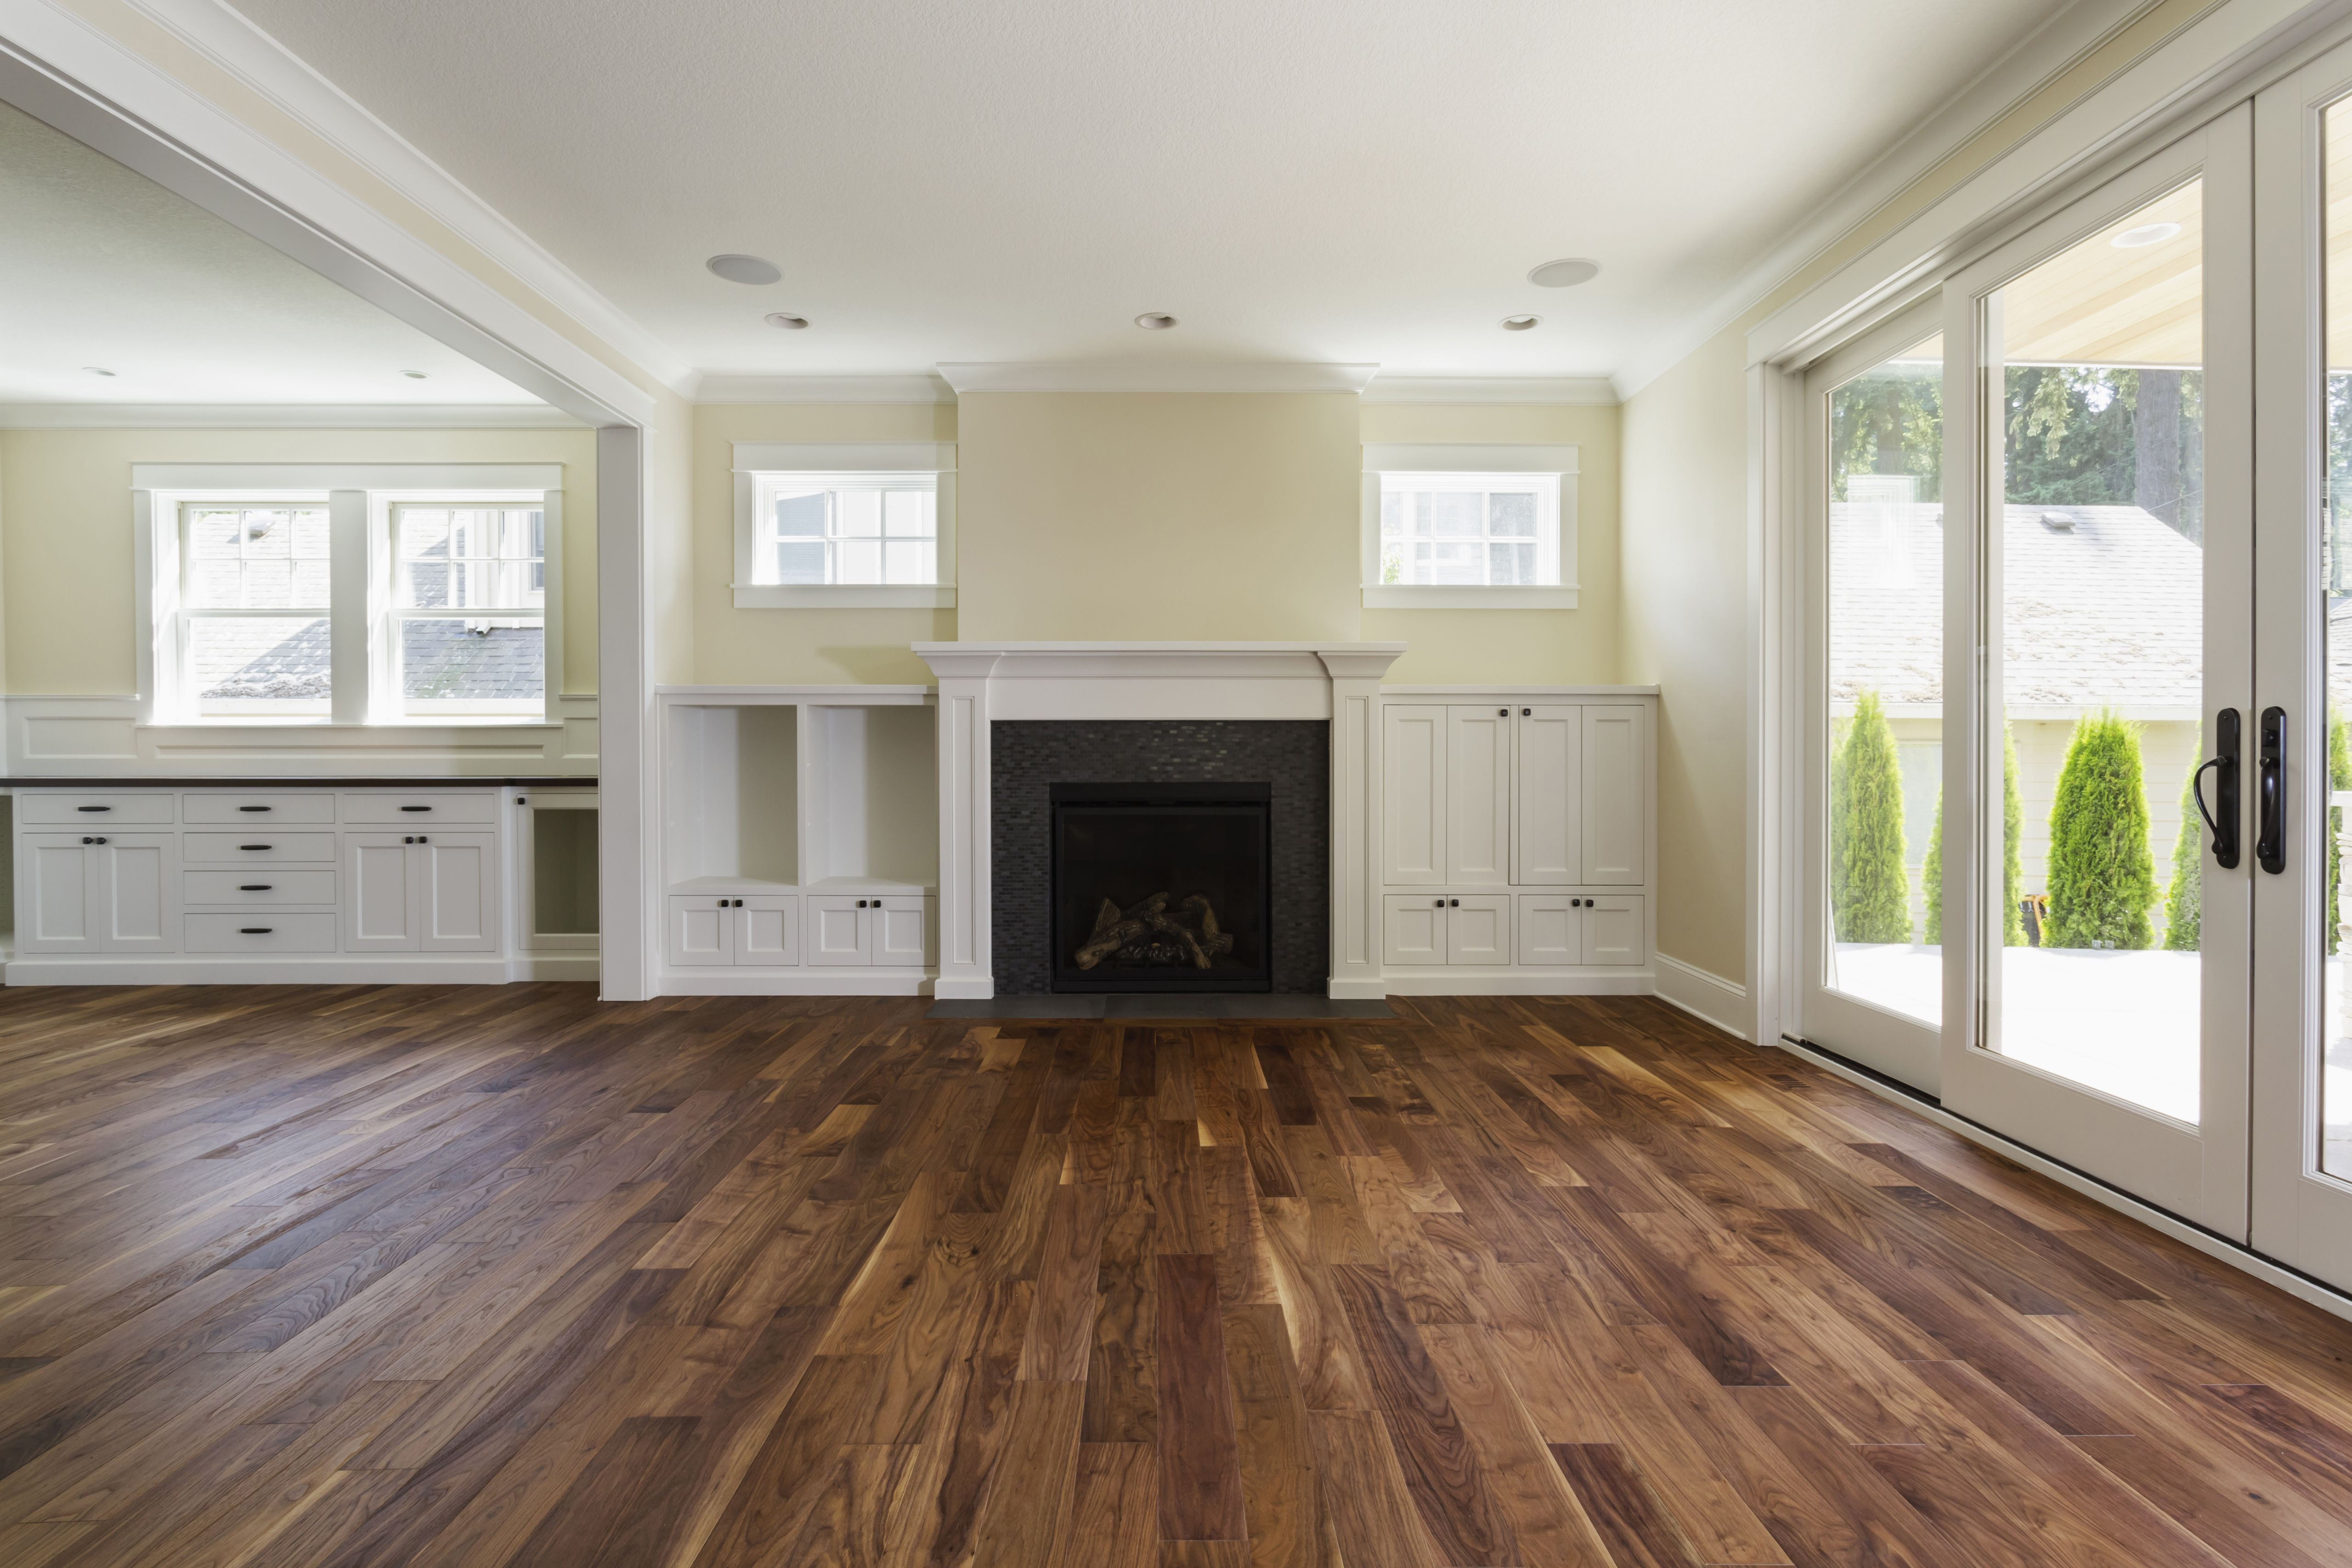 20 Trendy Hickory Hardwood Flooring Cost 2024 free download hickory hardwood flooring cost of the pros and cons of prefinished hardwood flooring regarding fireplace and built in shelves in living room 482143011 57bef8e33df78cc16e035397